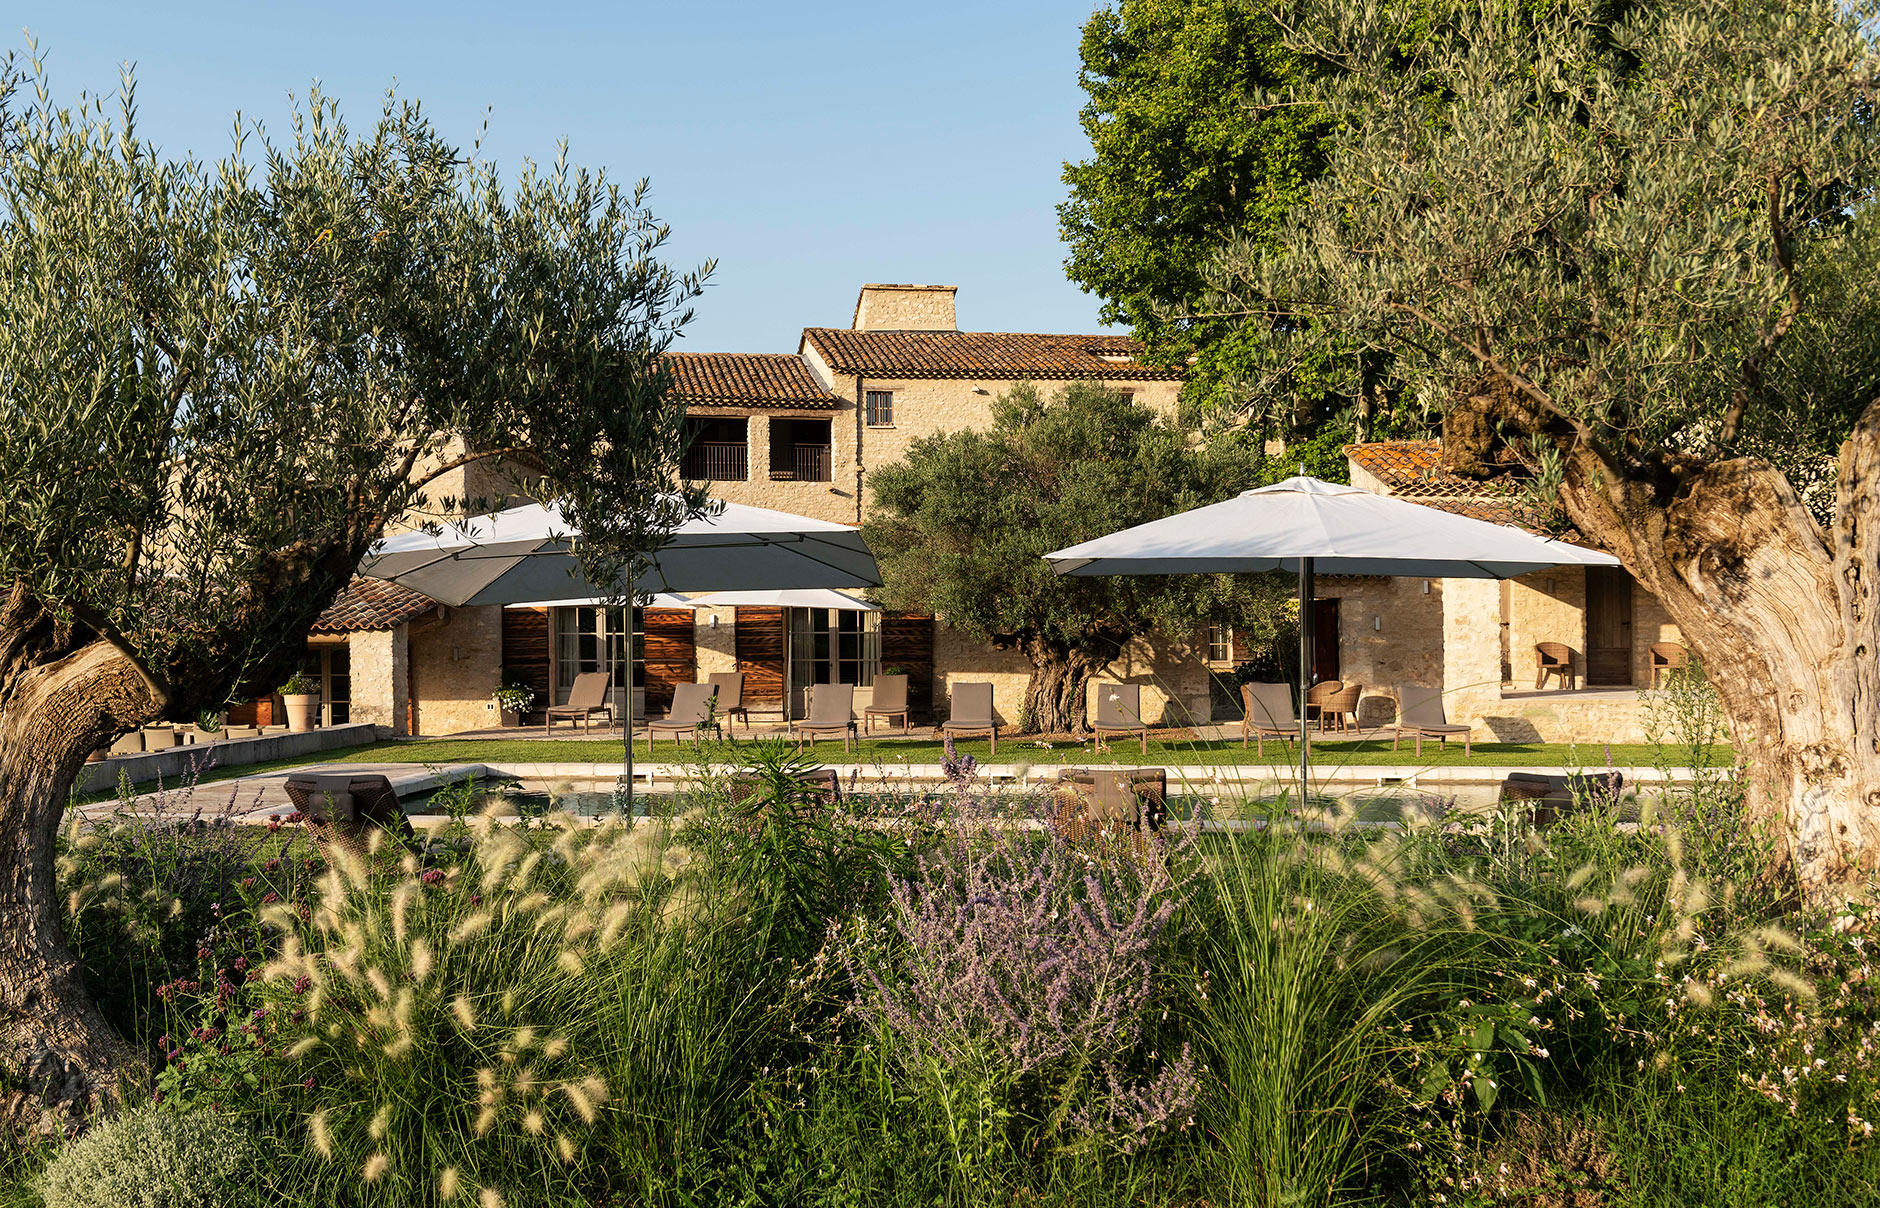 Coquillade Provence Resort & Spa, Gargas, Provence, France. Photo © La Coquillade